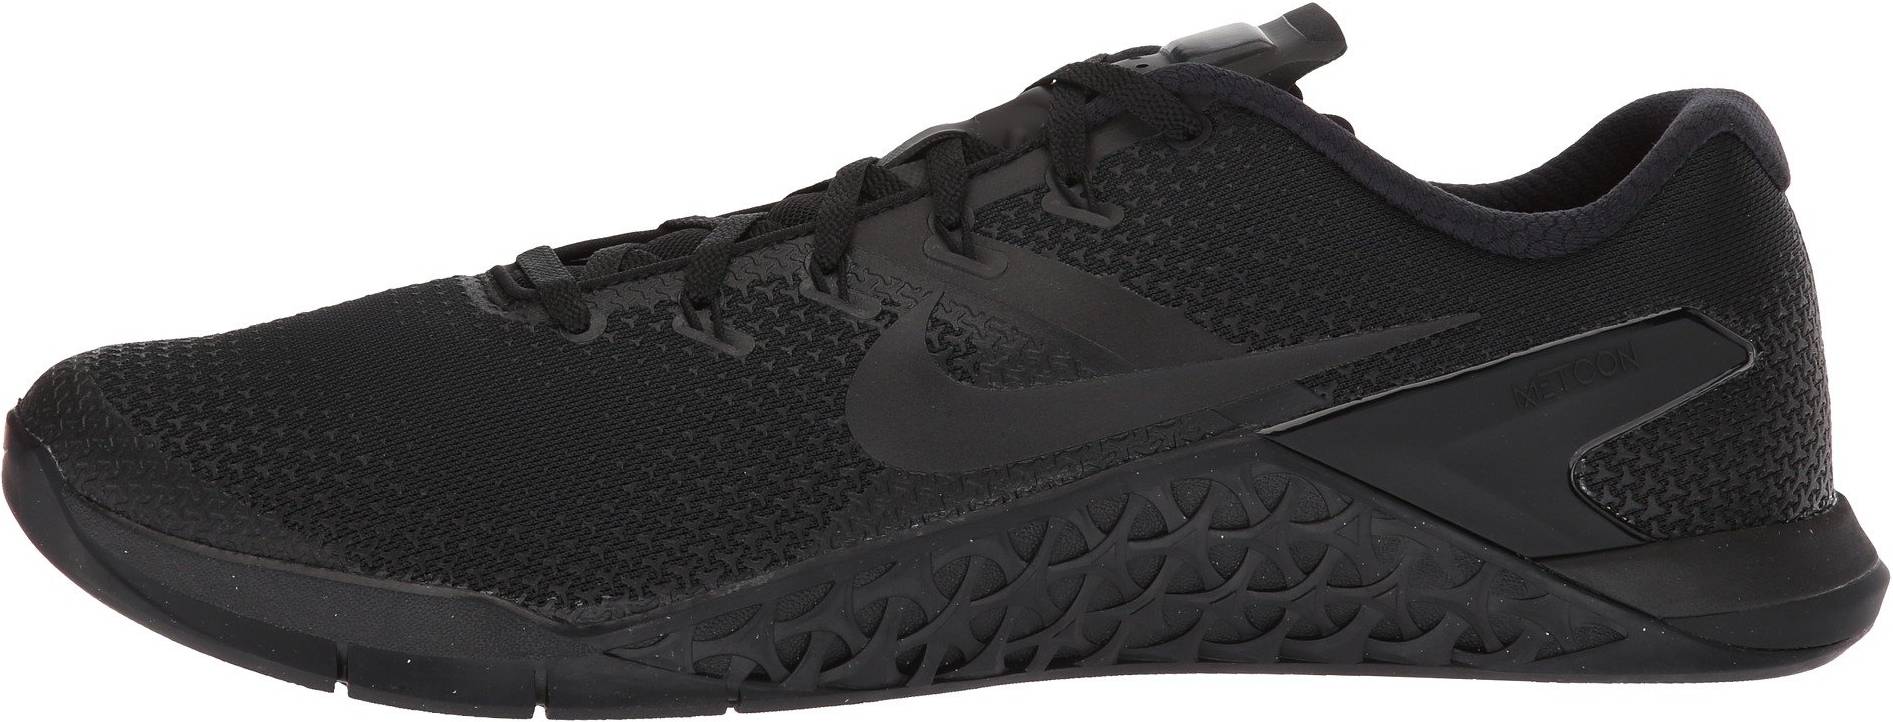 Only $64 + Review of Nike Metcon 4 